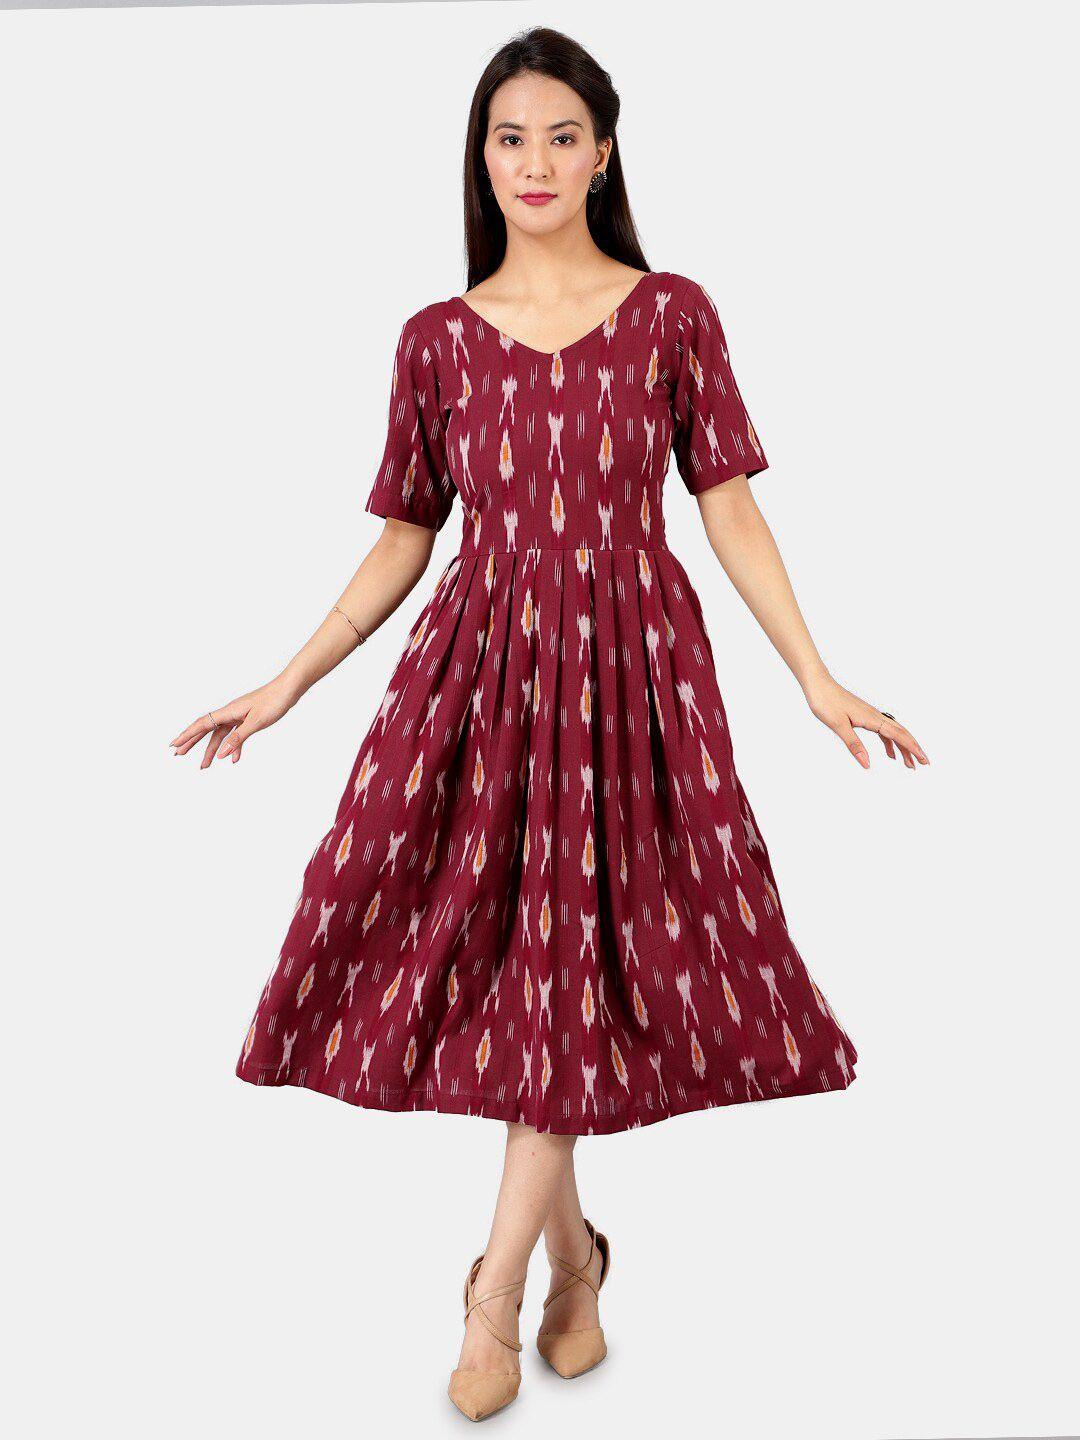 indophilia v-neck ethnic motifs ikat printed cut out cotton fit and flare midi dress